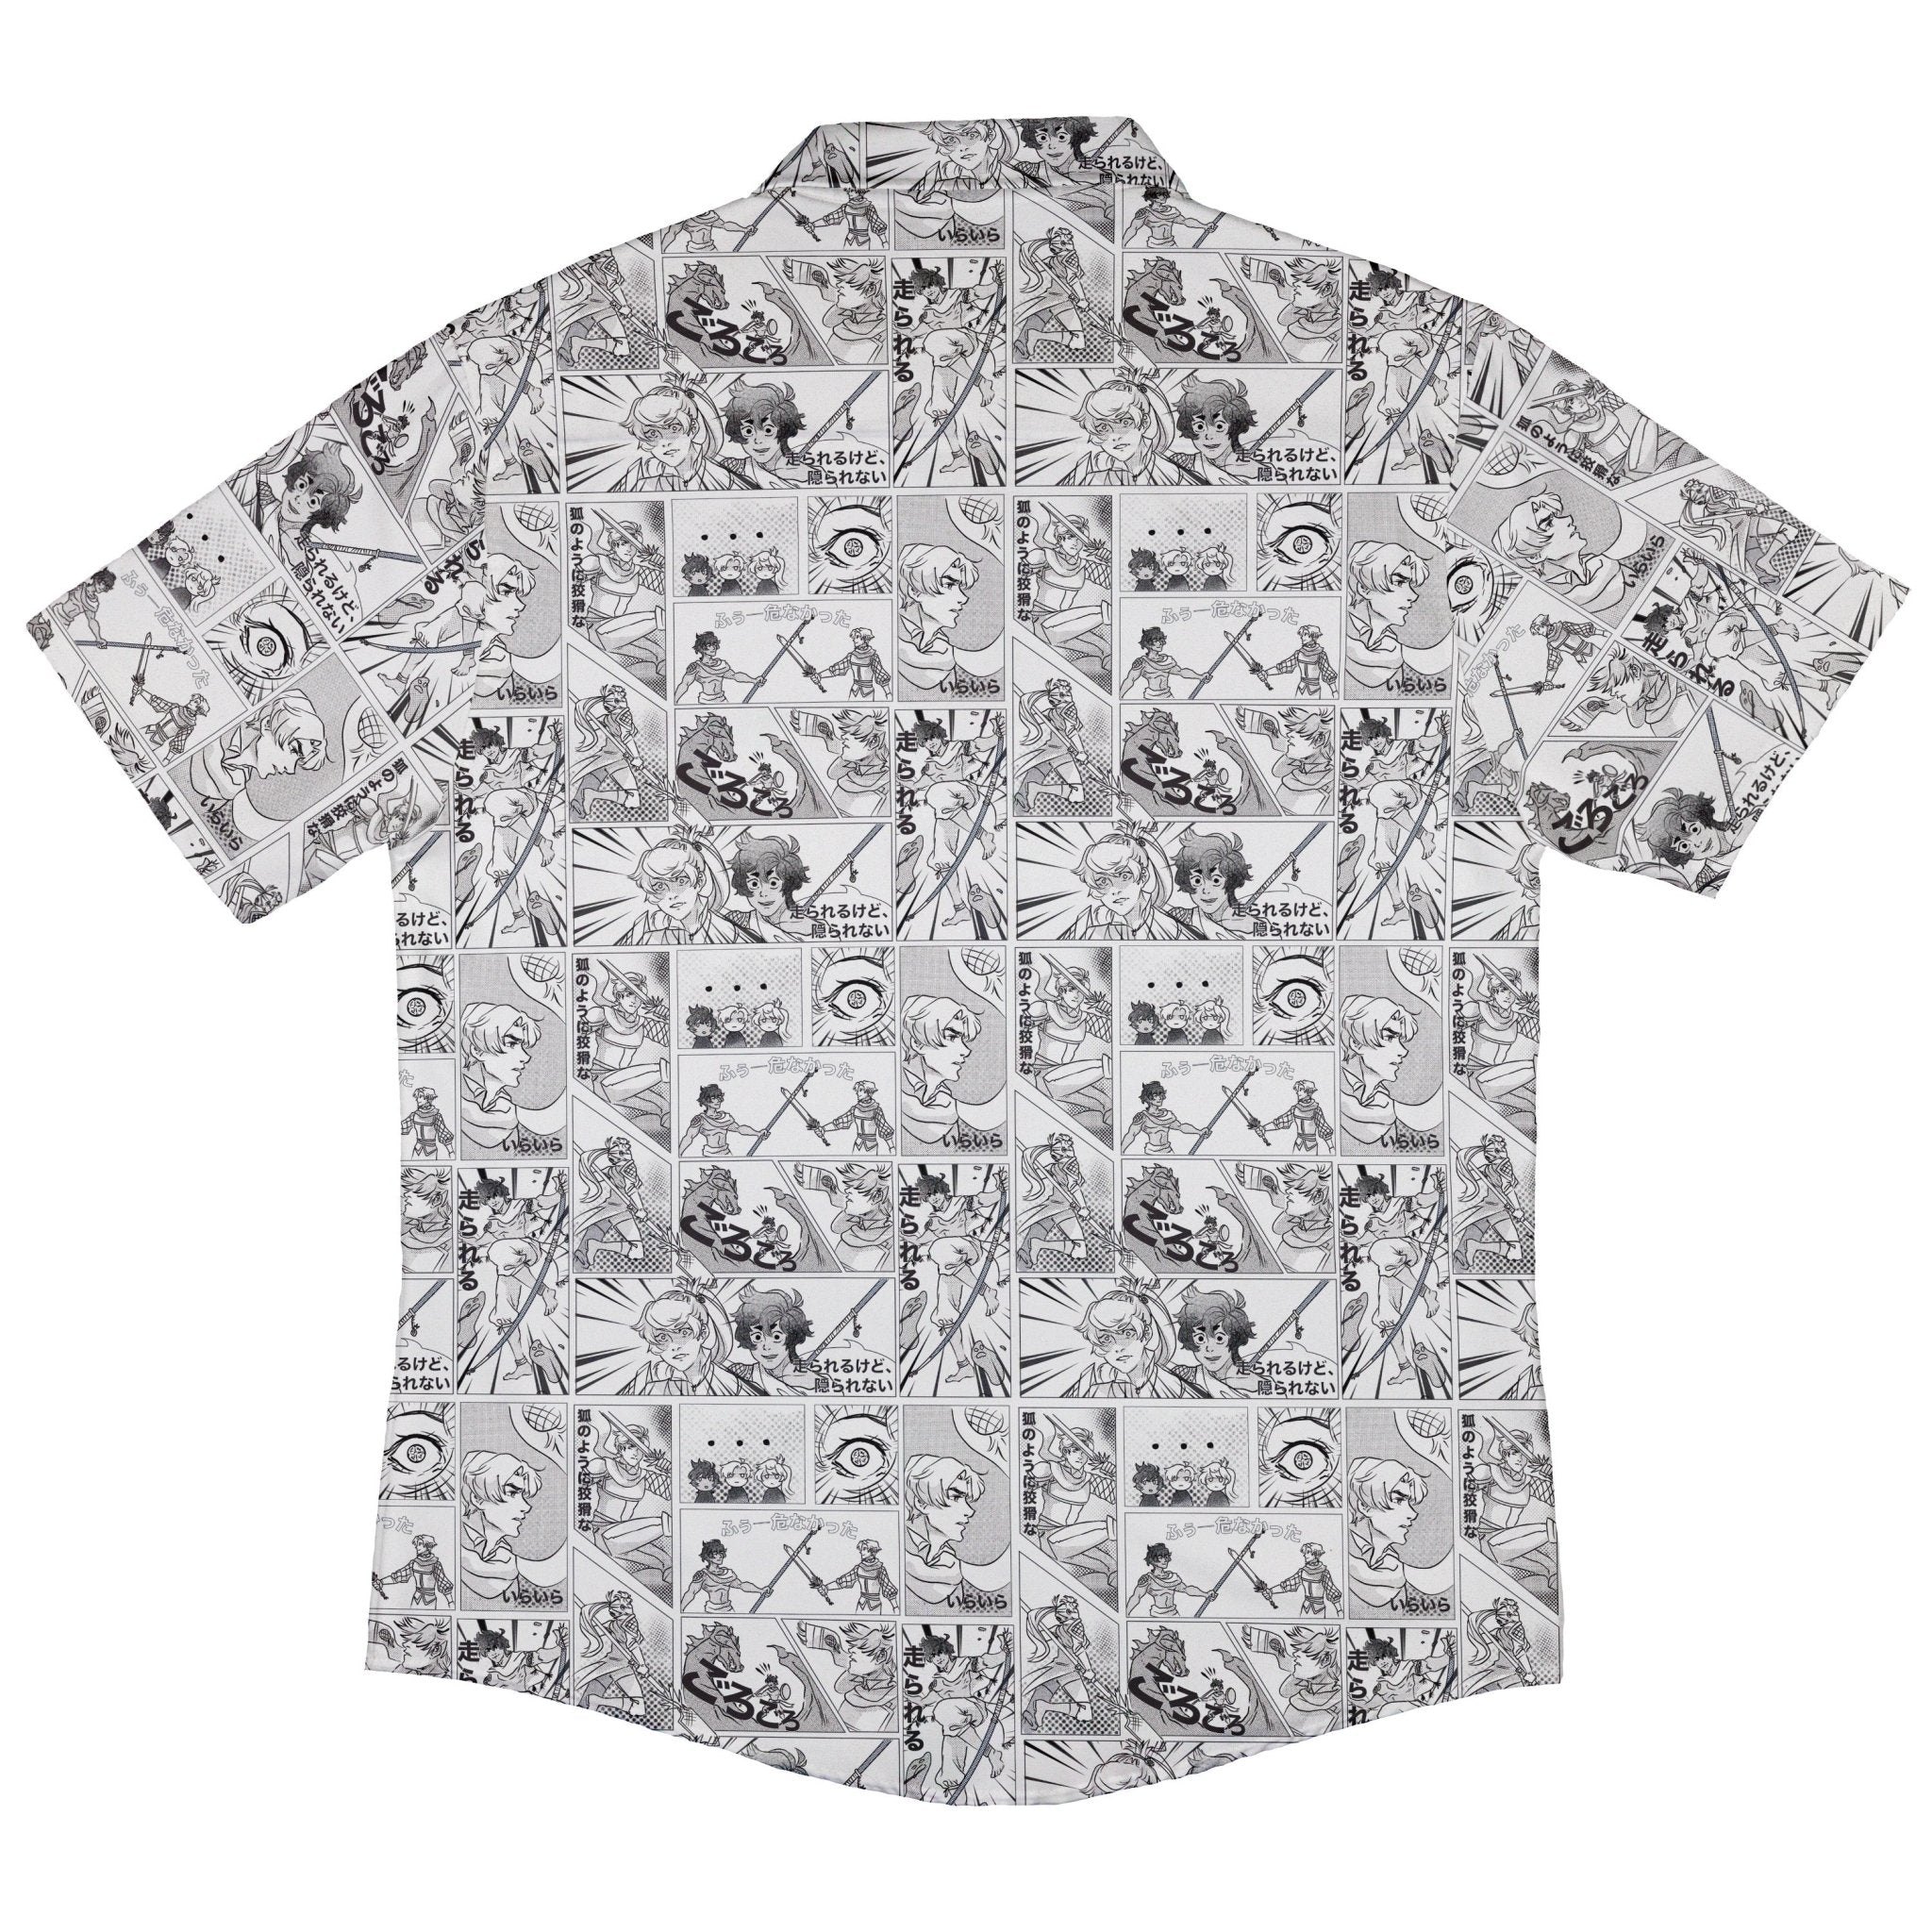 Geek Tropical Manga Button Up Shirt - adult sizing - Anime - Design by Claire Murphy